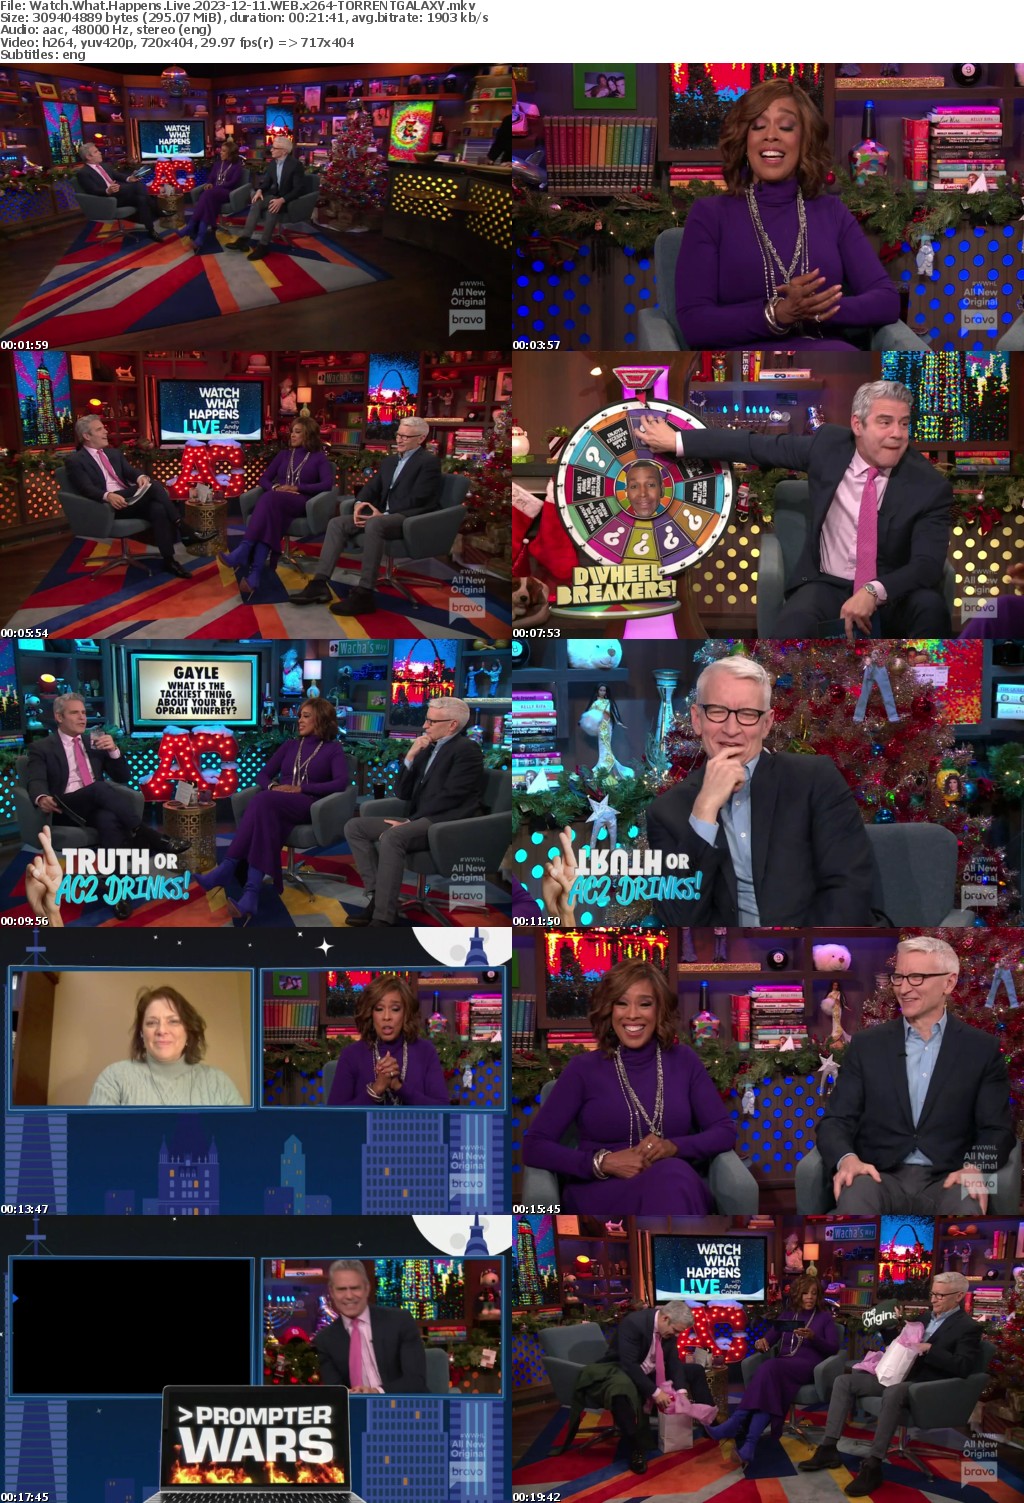 Watch What Happens Live 2023-12-11 WEB x264-GALAXY